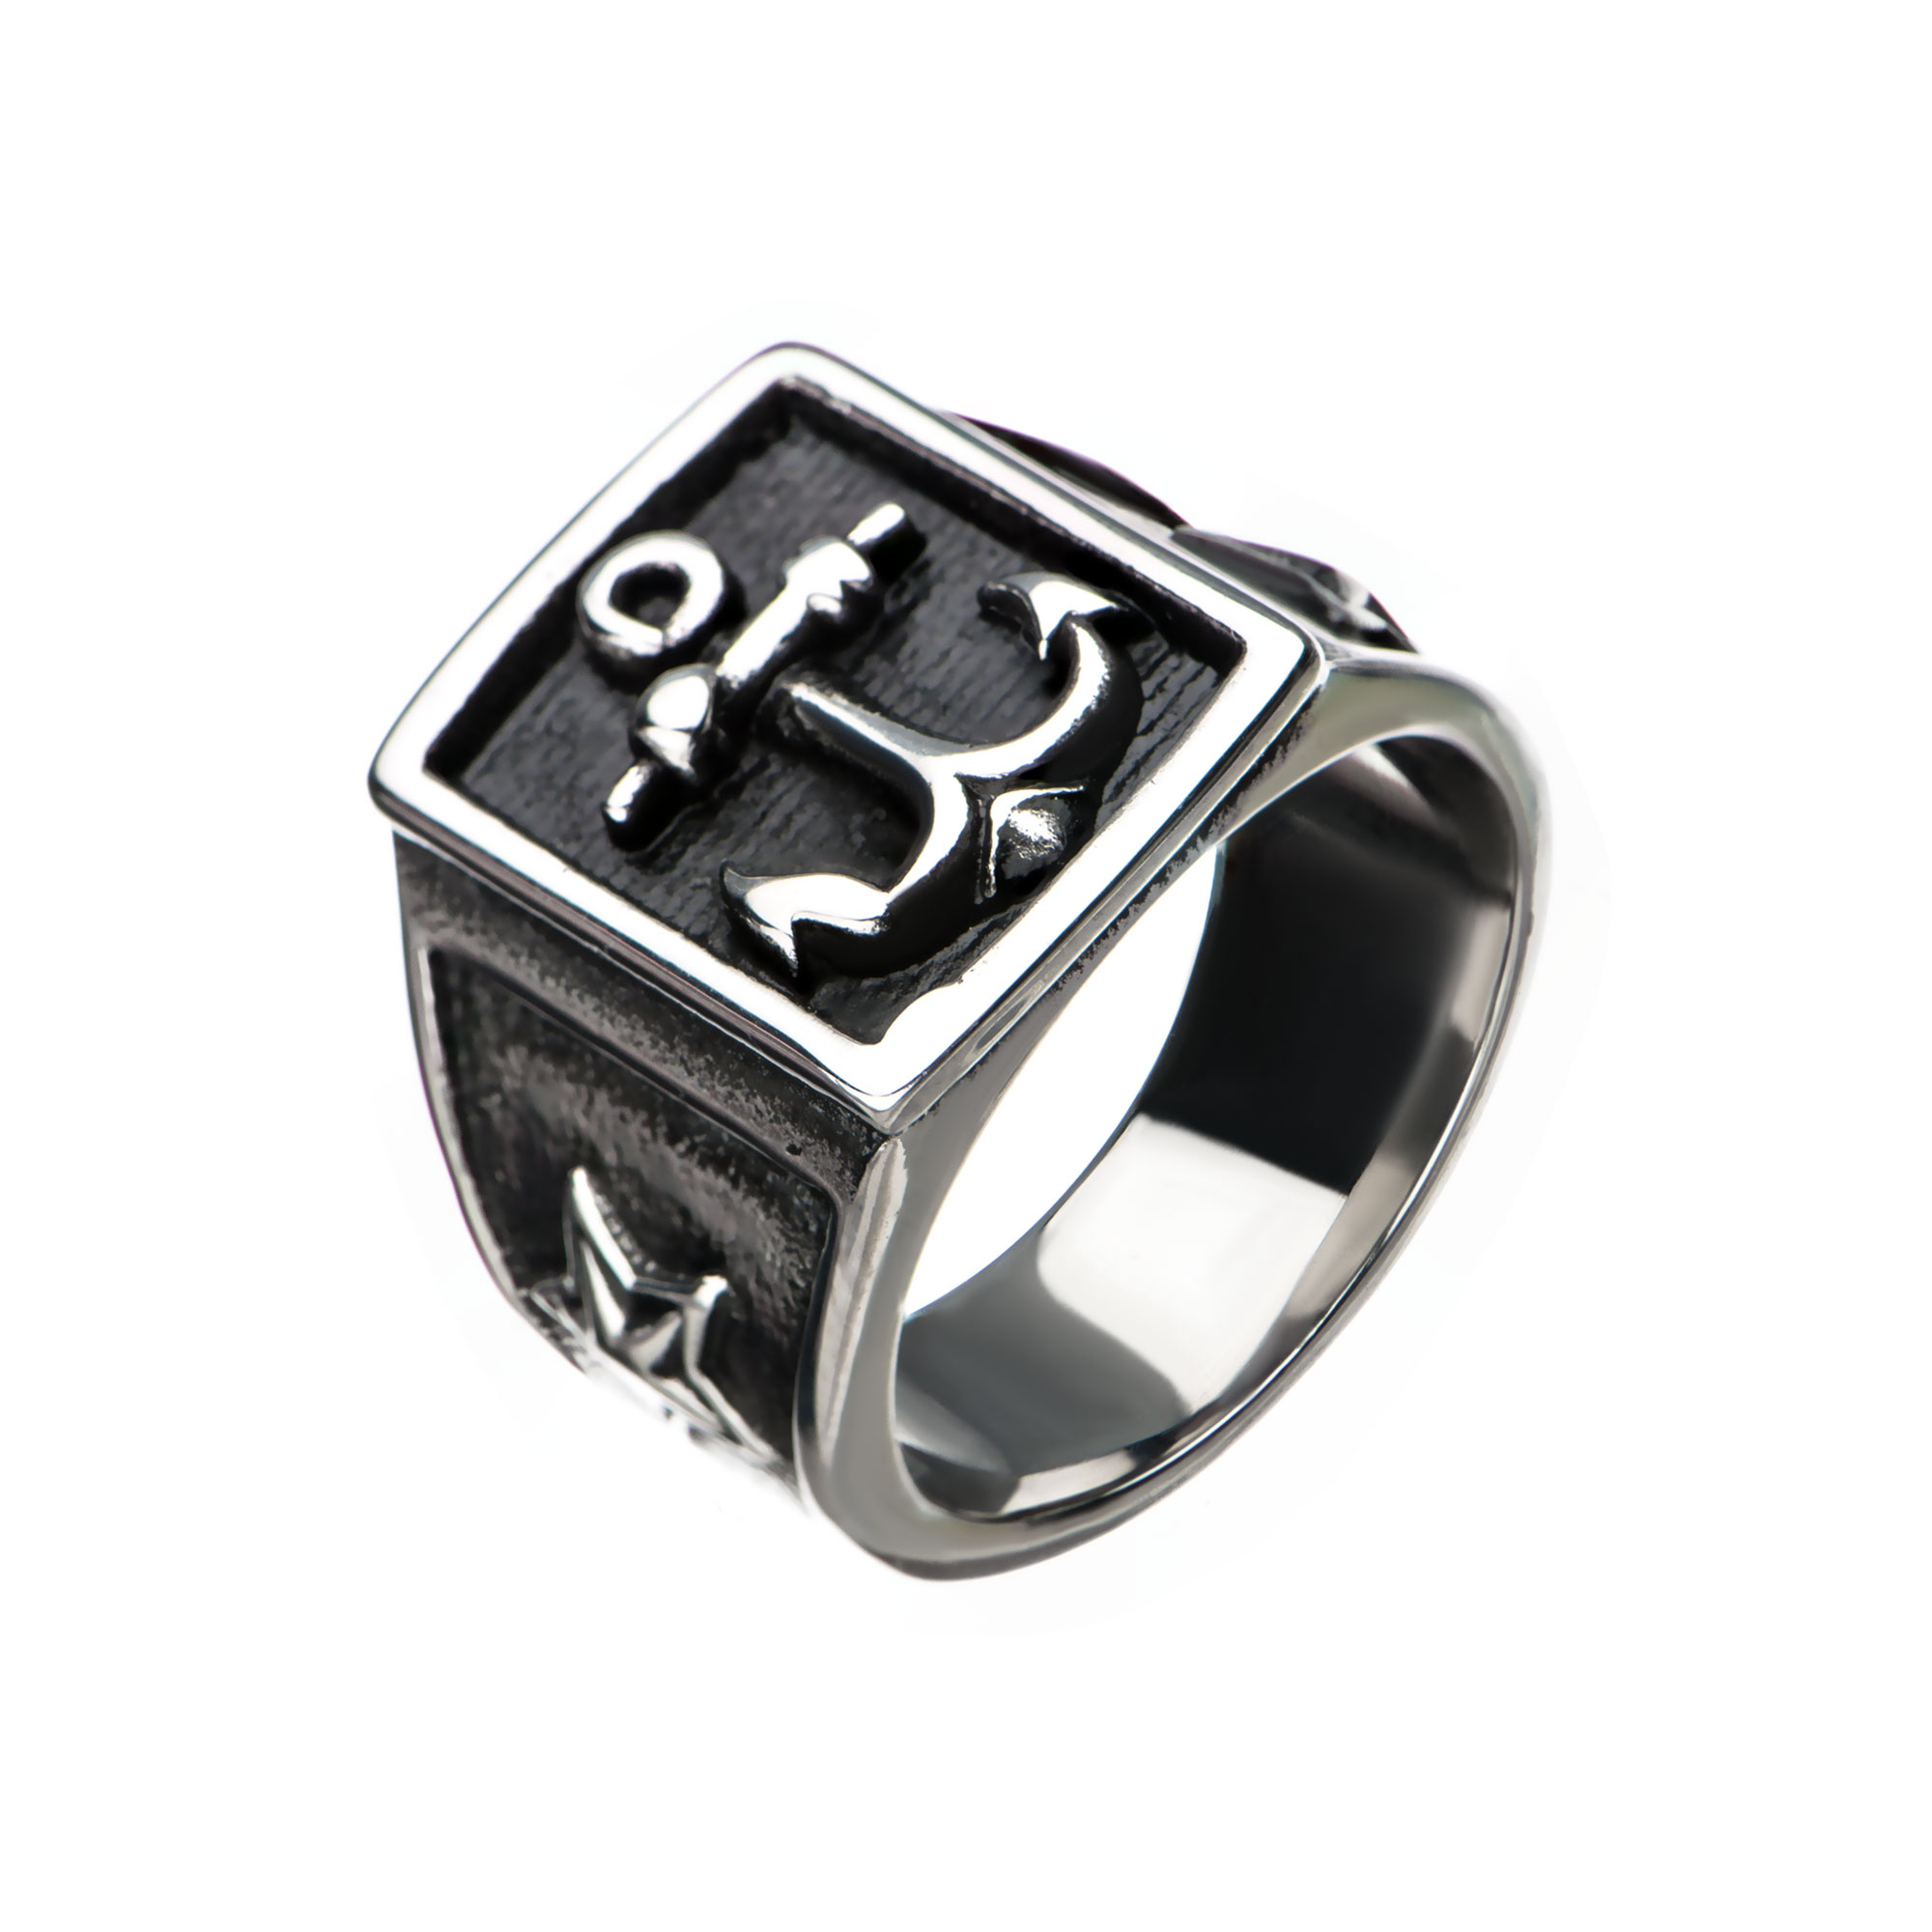 Steel & Black Plated Oxidized Anchor Signet Ring Thurber's Fine Jewelry Wadsworth, OH